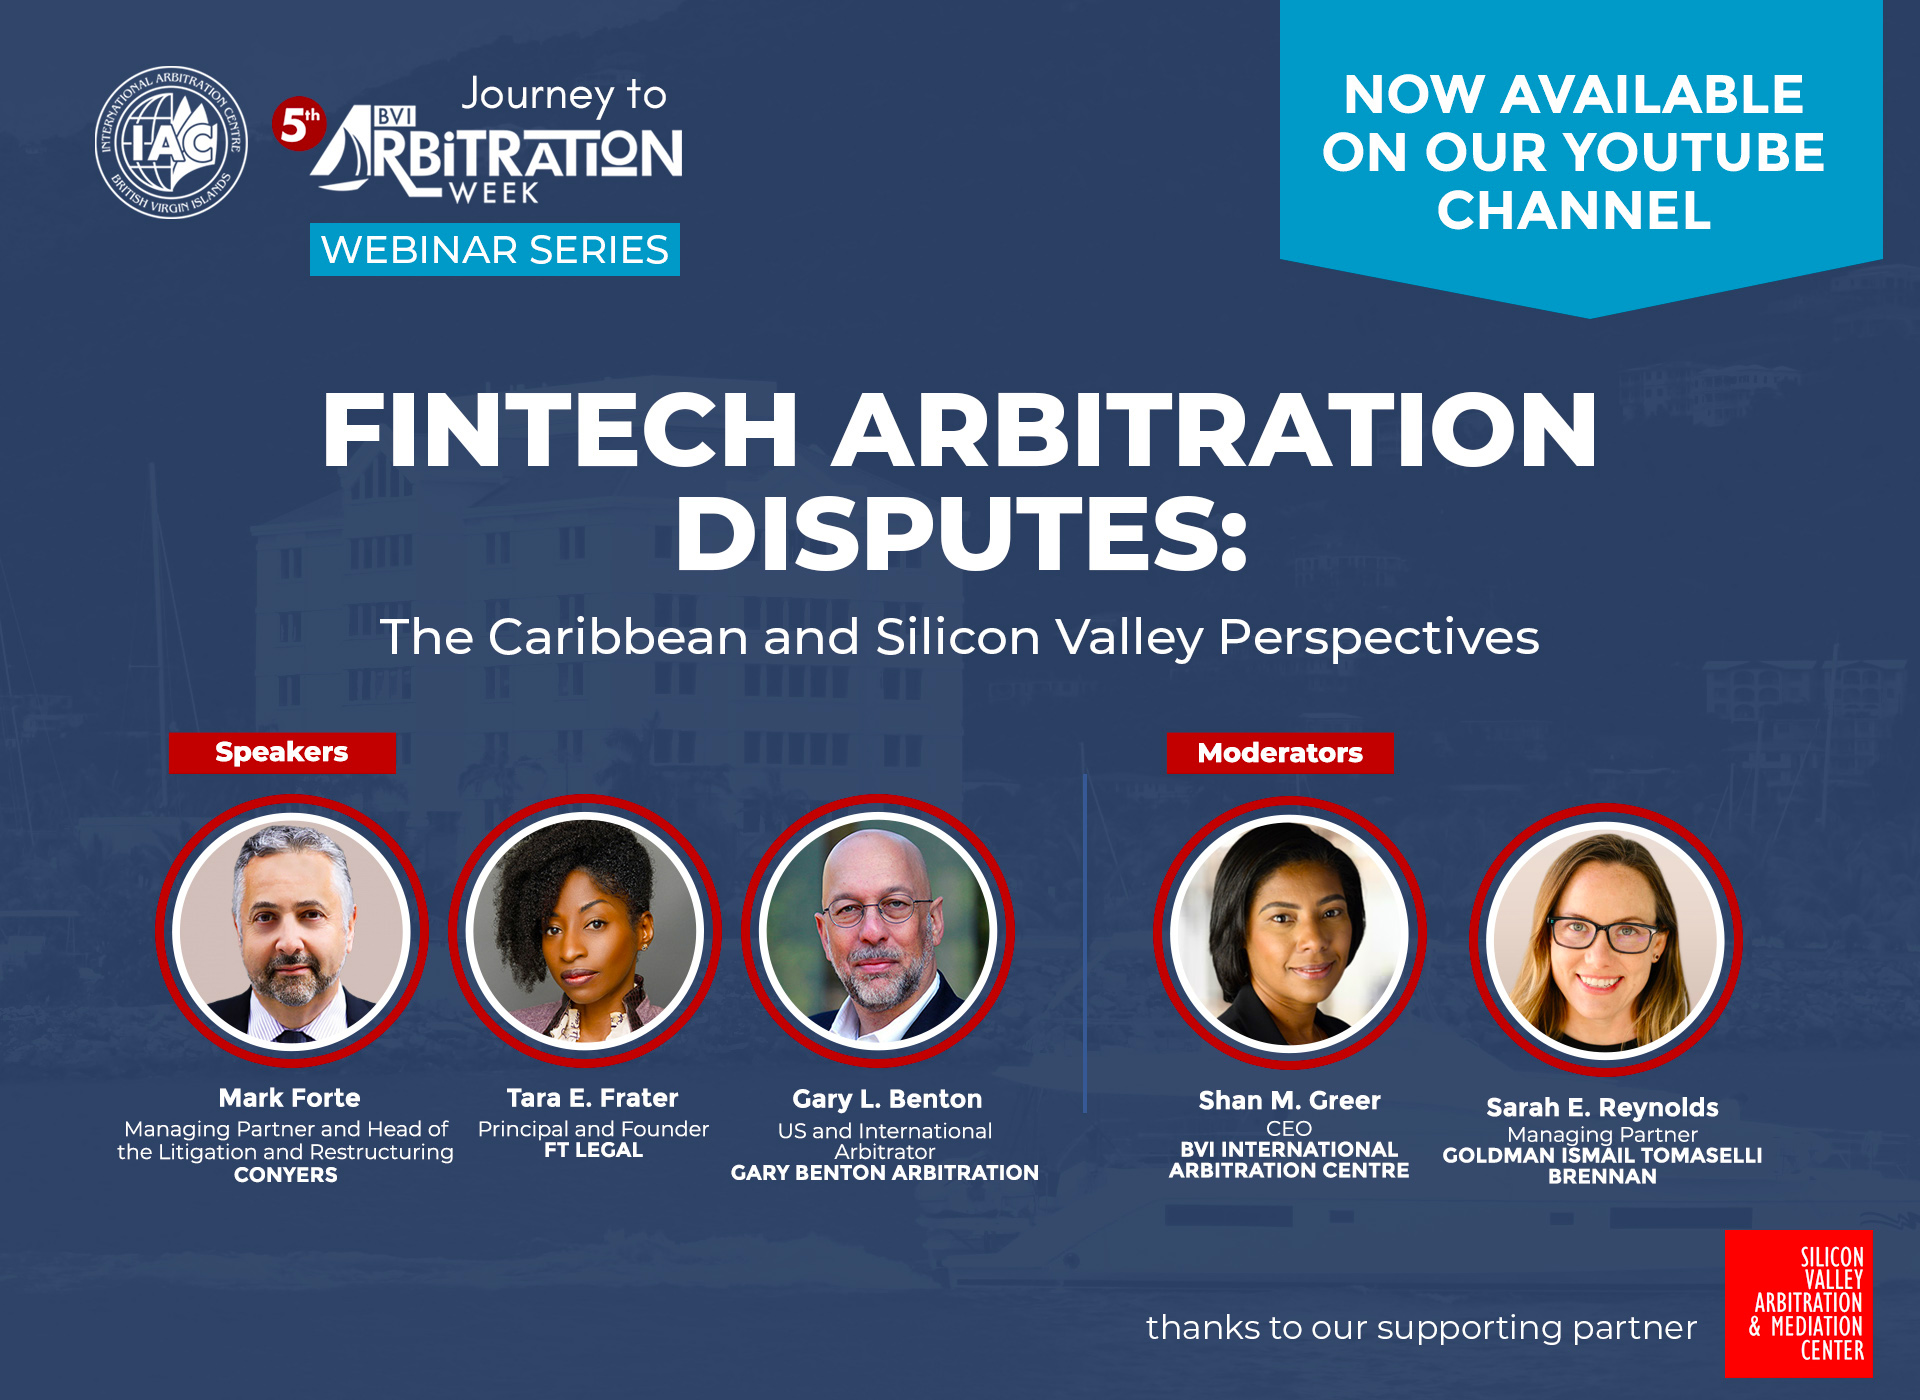 FINTECH ARBITRATION DISPUTES: The Caribbean and Silicon Valley Perspectives (Webinar Video)